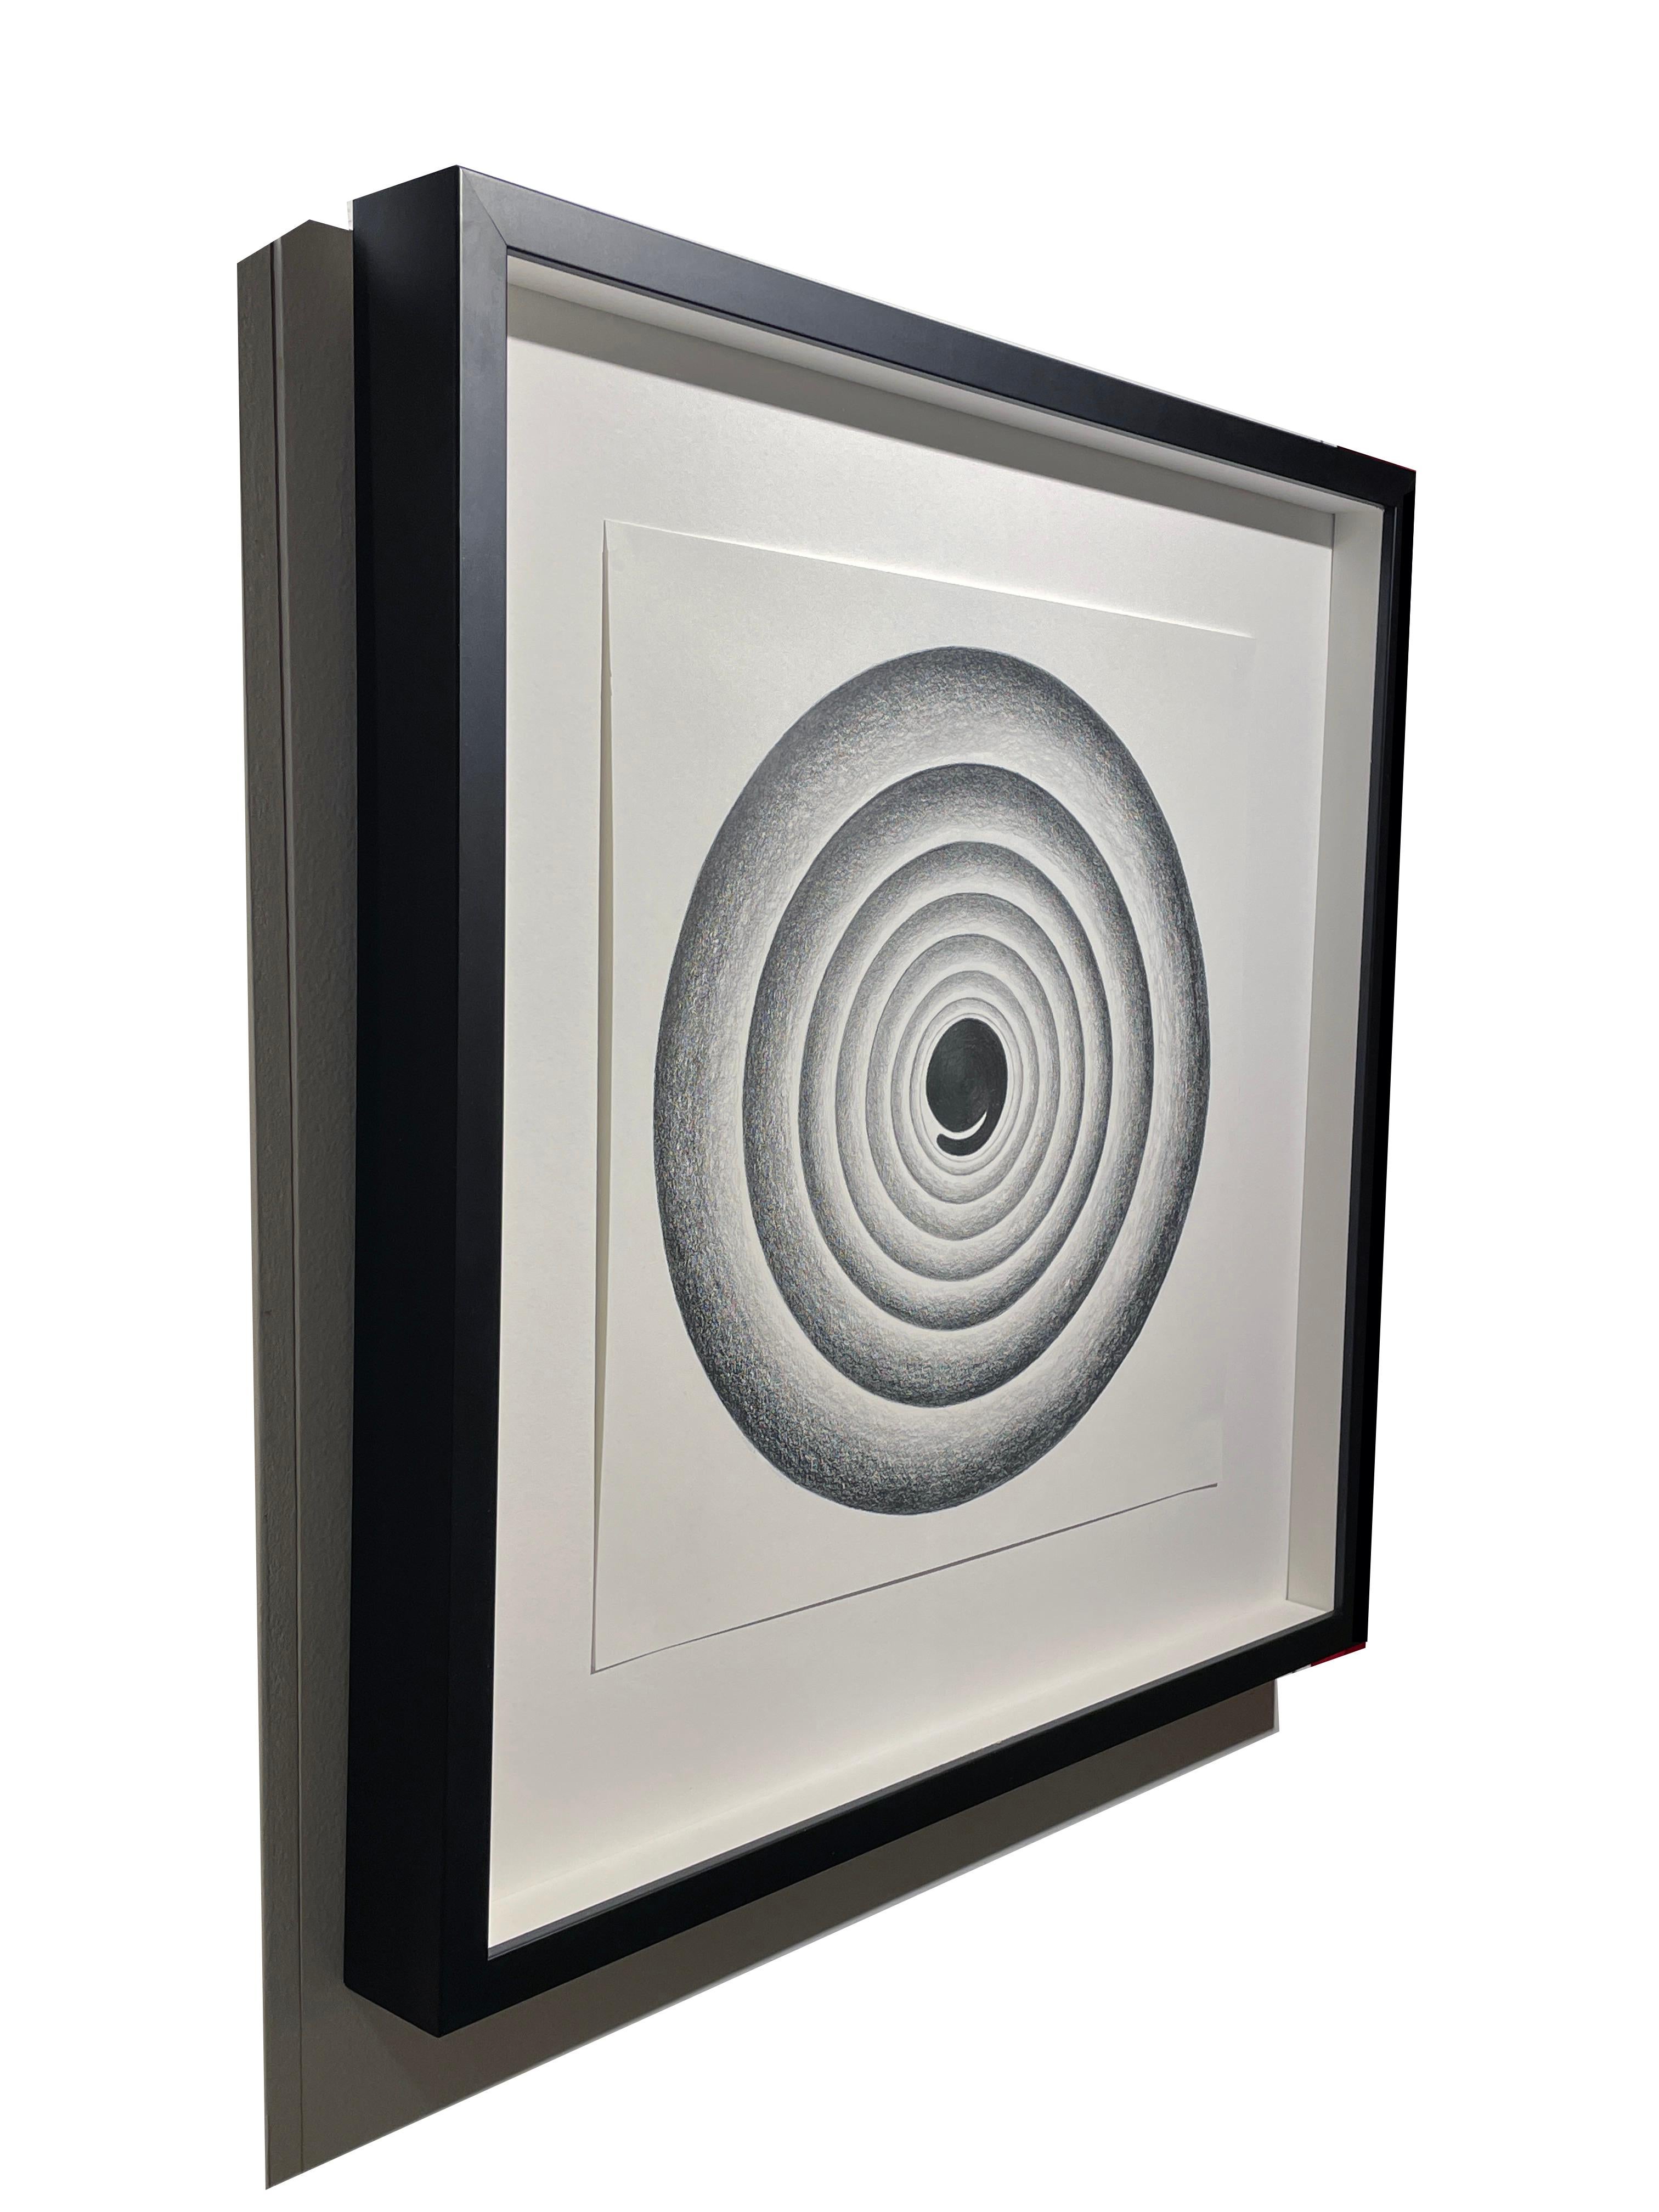 Arena, Geometric Circular Abstraction, Graphite on Paper, Framed 1